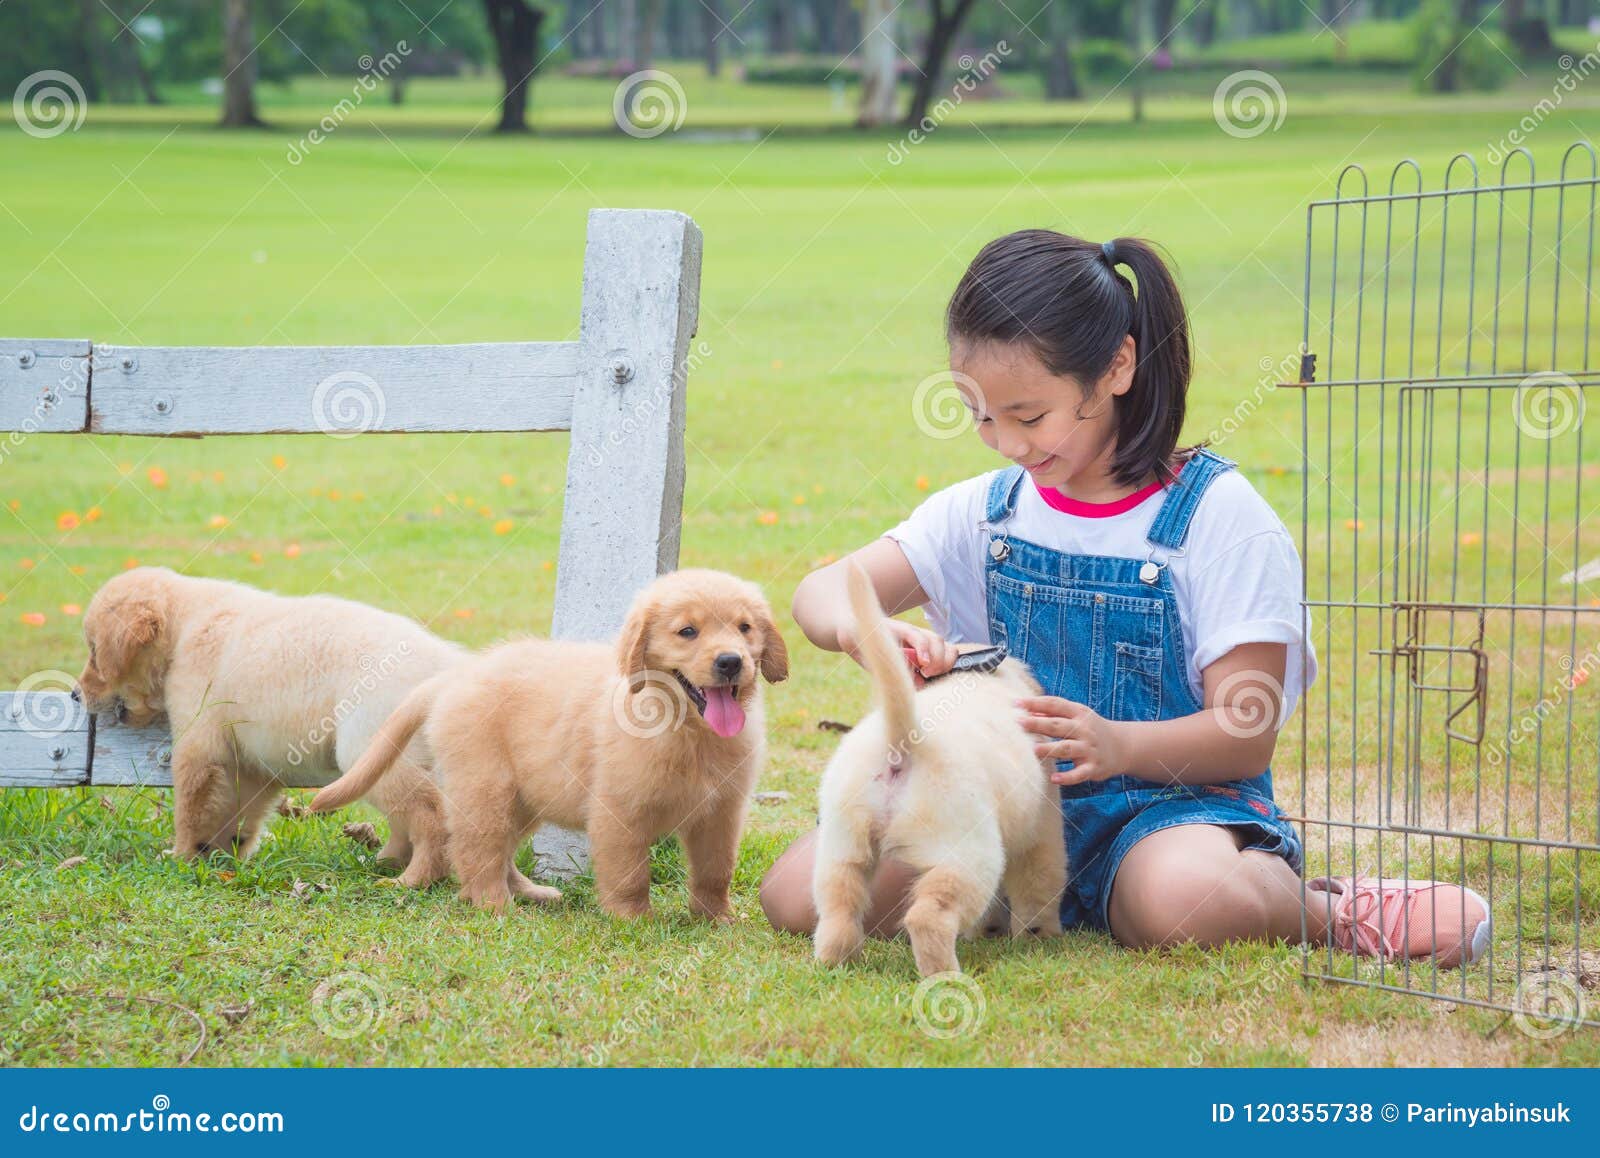 girl playing with little golden retriever dog in par